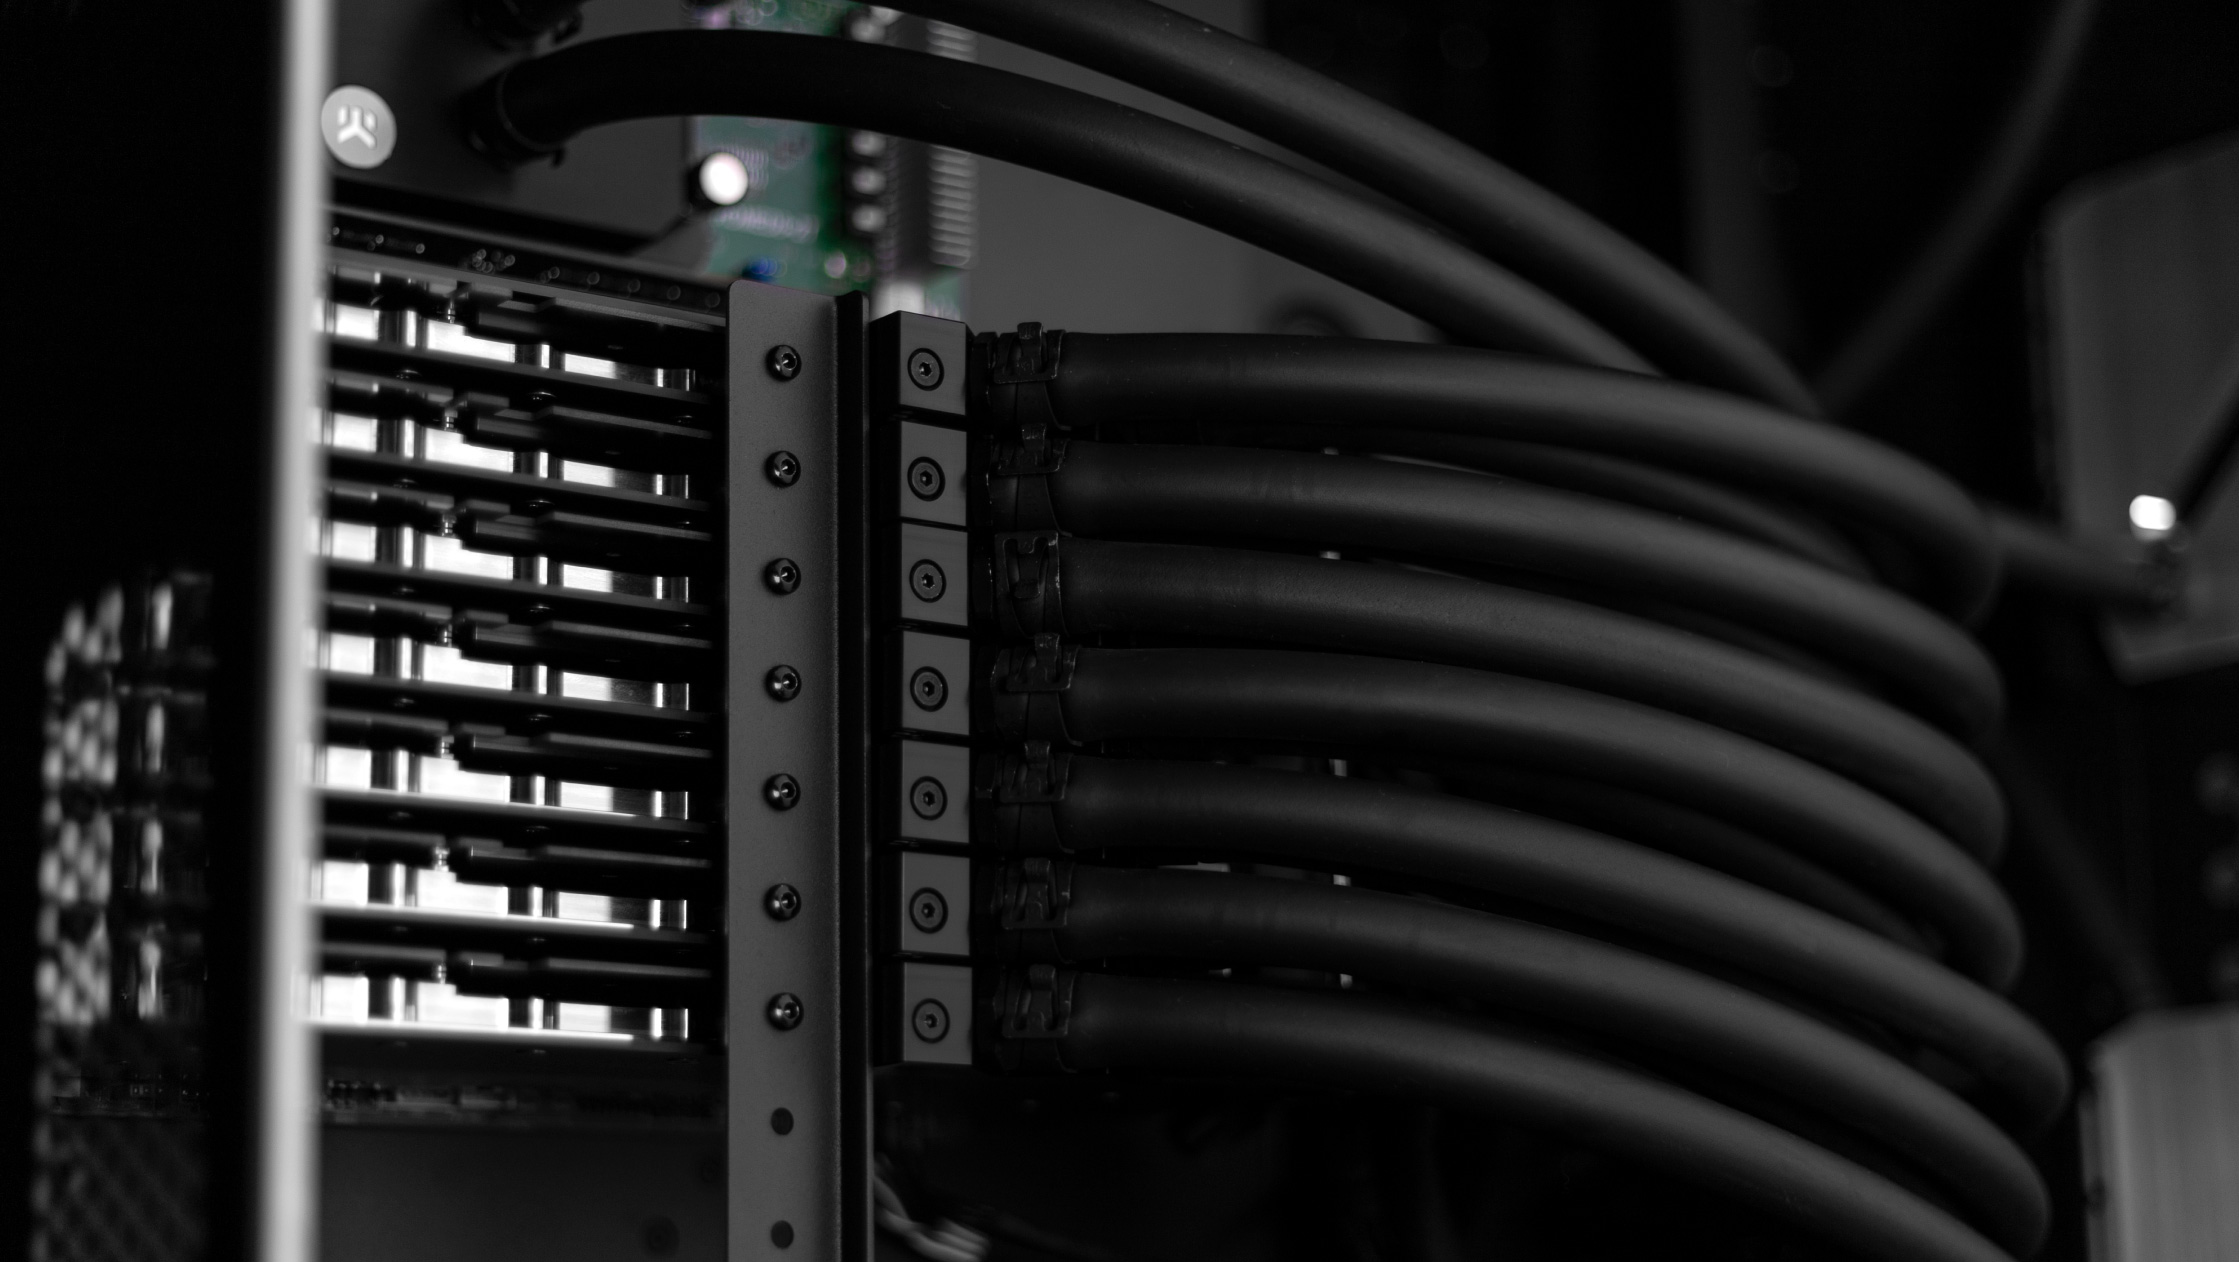 EK Fluid Works mining rigs and computers utilize industrial-grade materials and liquid cooling components for long and reliable service life, free of leaks and malfunctions.